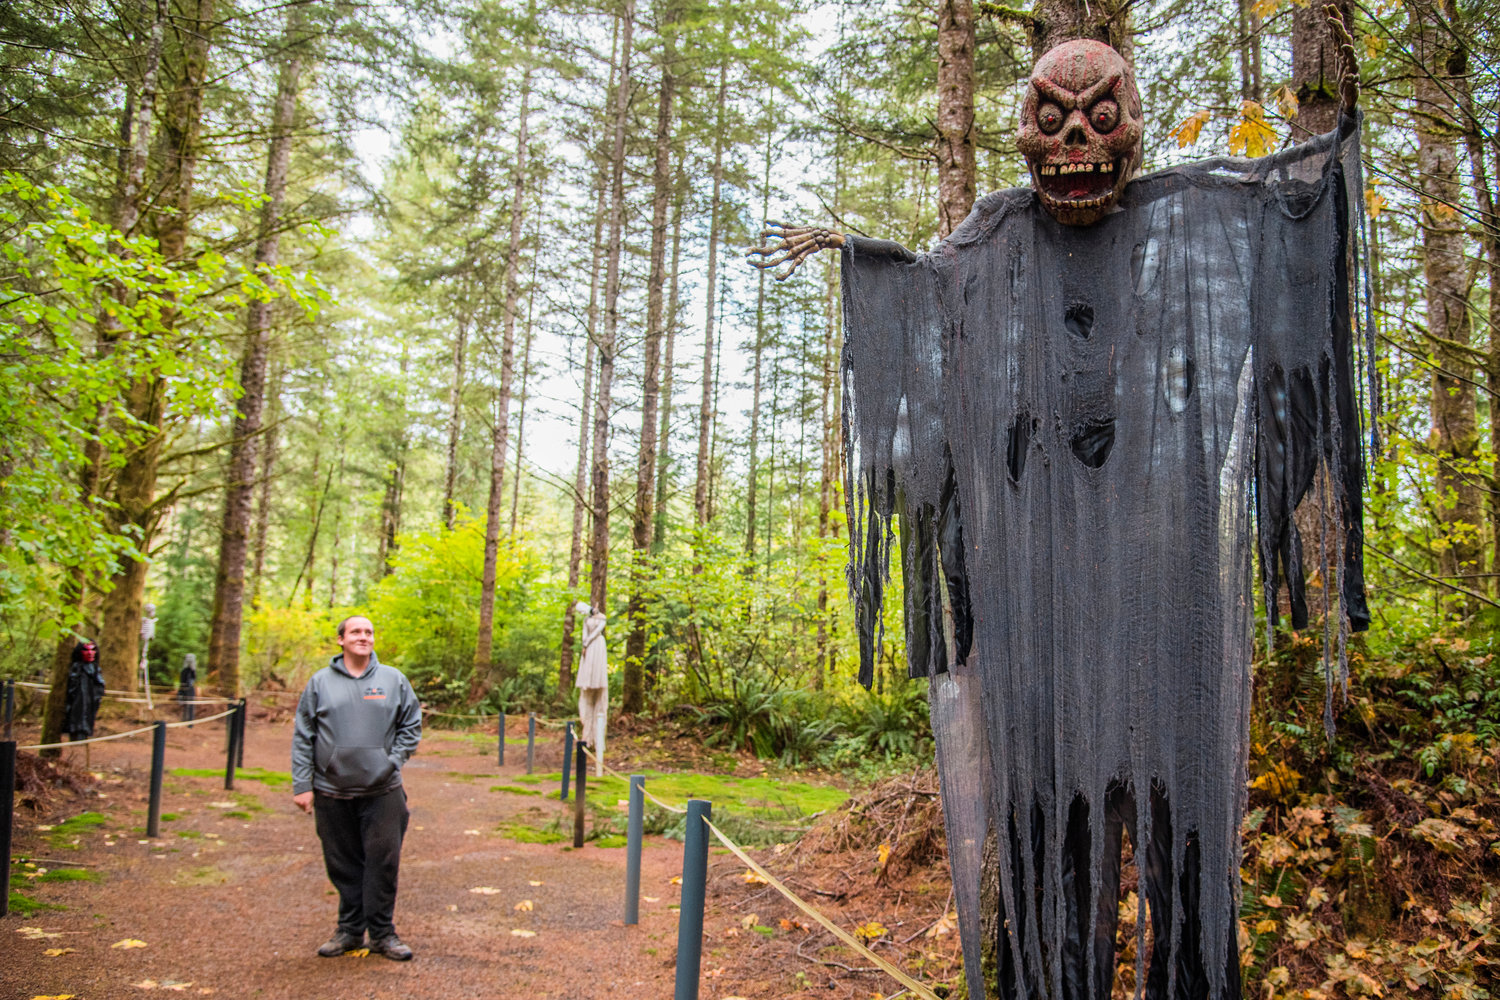 Landon Huntting smiles and looks up to a large spooky figure hung on a tree inside the haunted forest at The Huntting’s Farm in Cinebar.